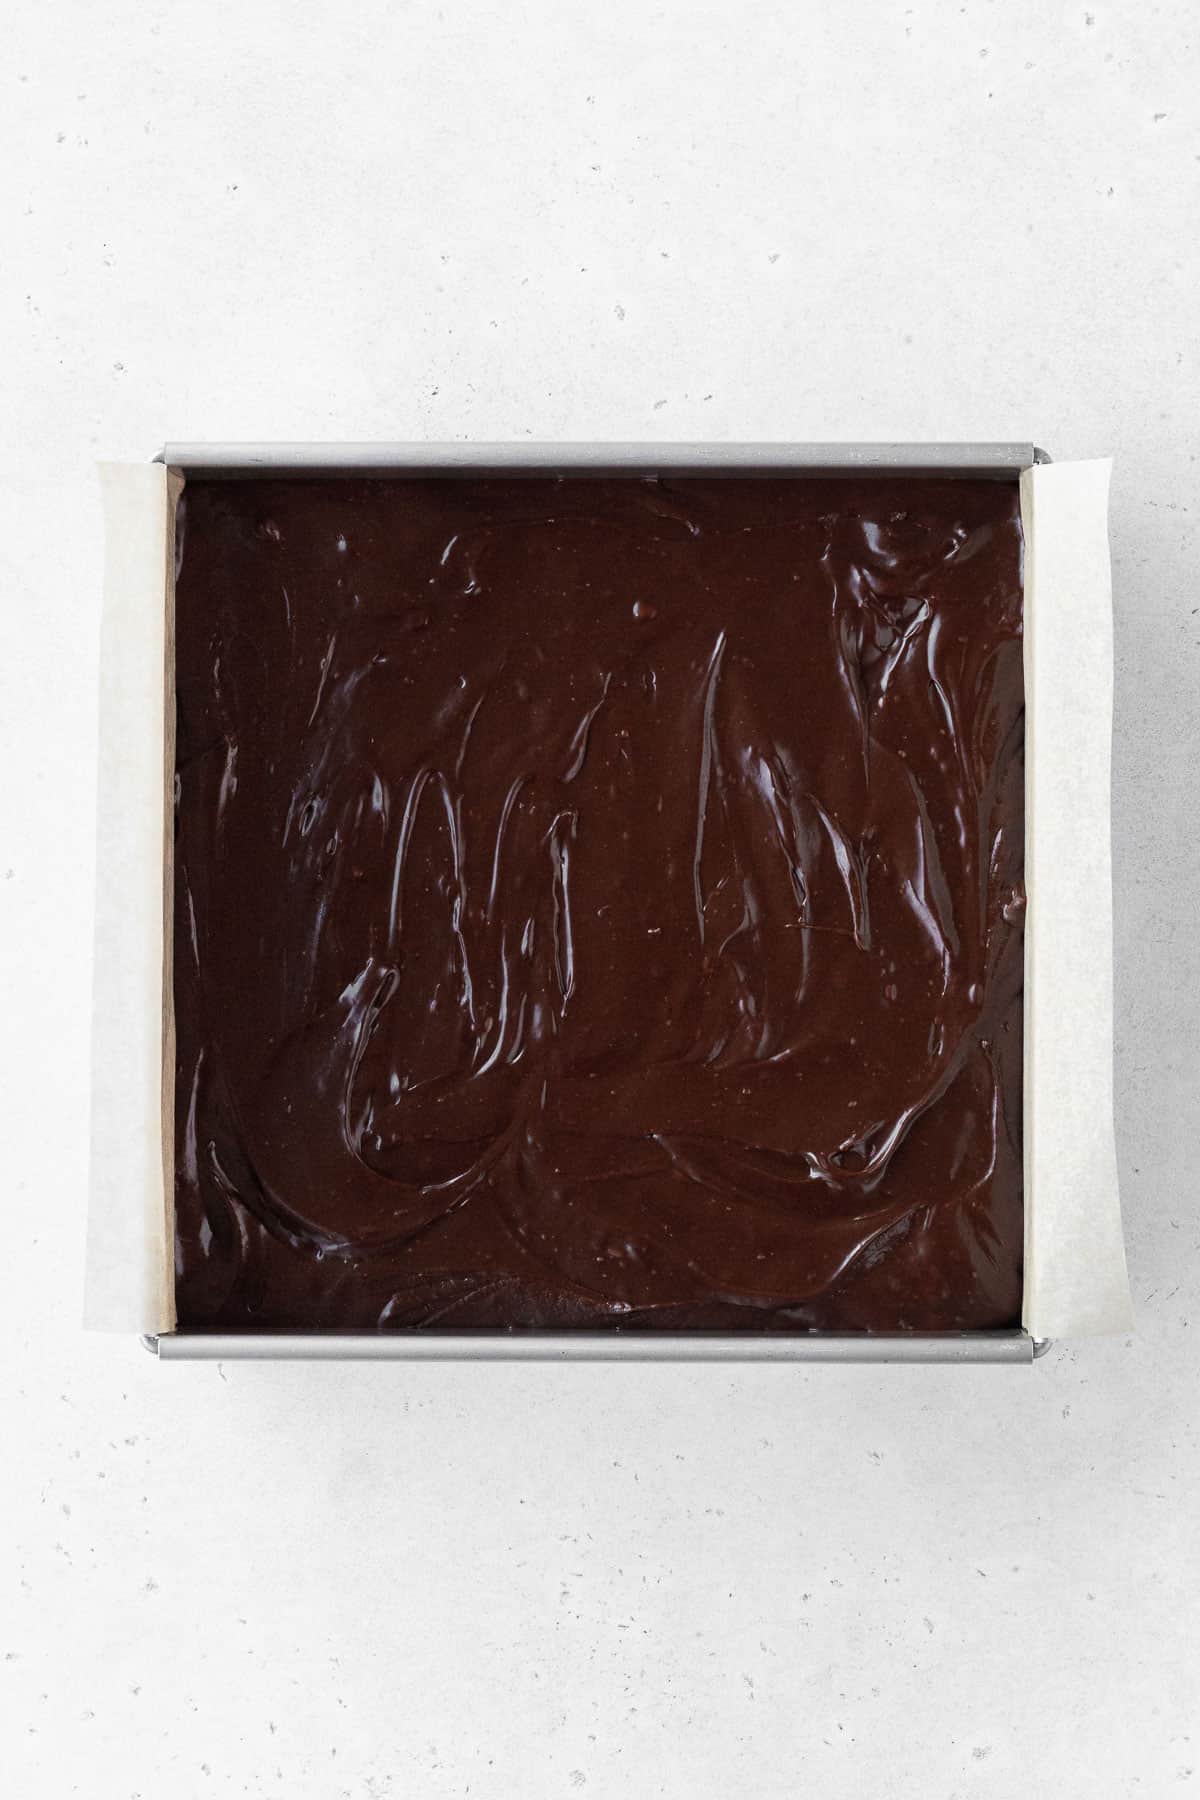 Dairy-free fudge batter poured into the parchment-lined baking tin and smoothed out with a spatula.